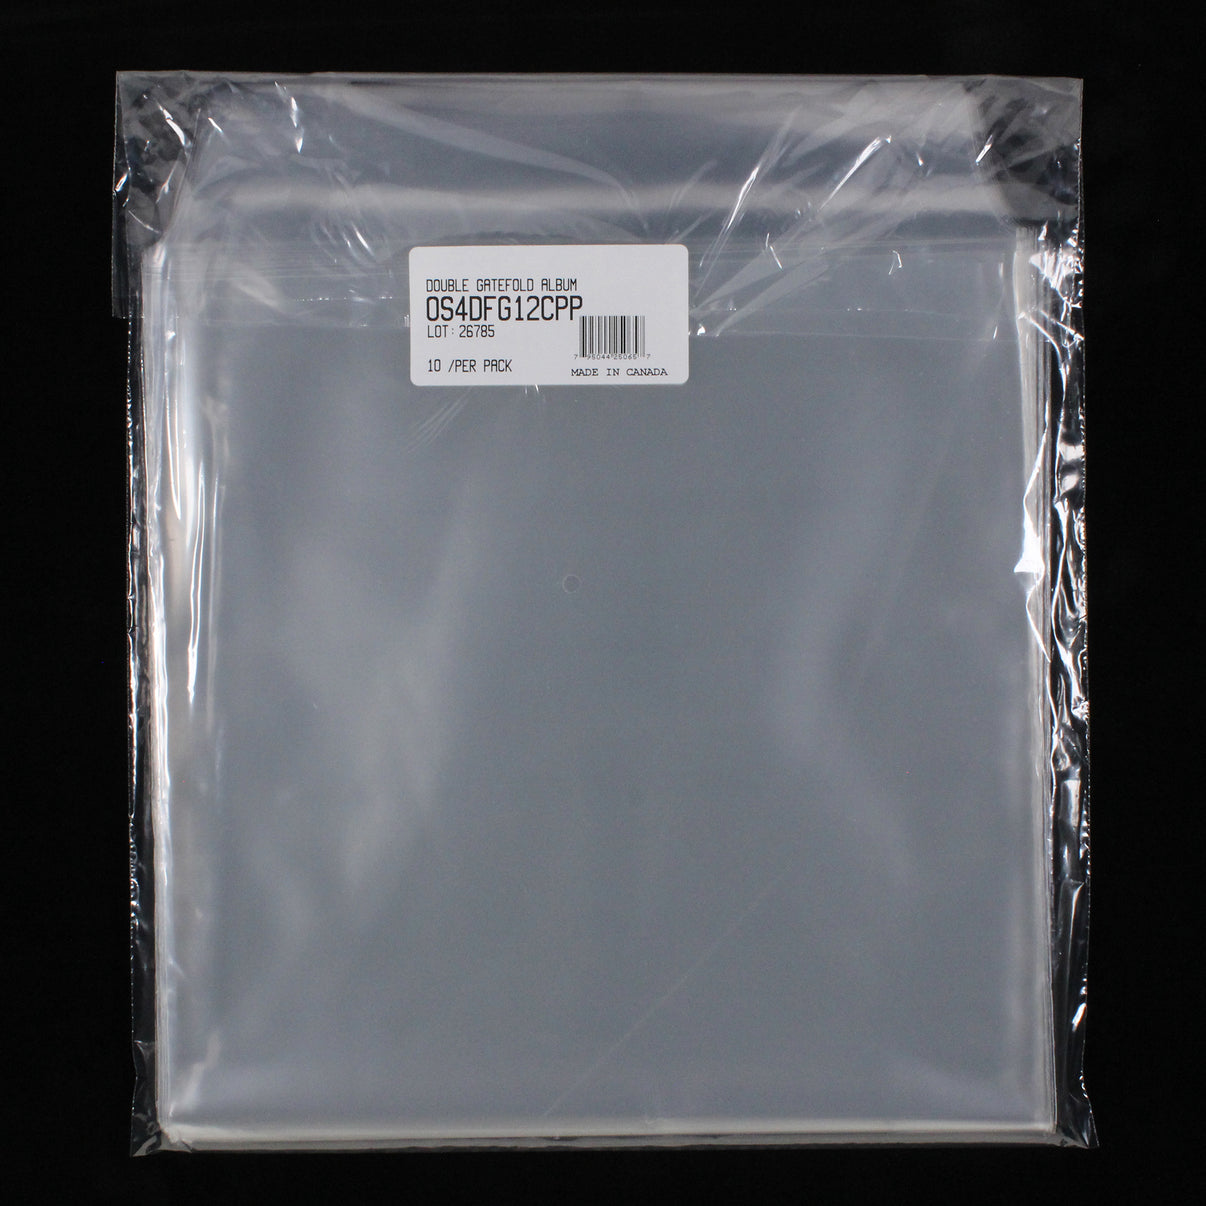 Vinyl Storage Solutions - 12" Gatefold Outer Sleeves w/ Two Flaps - 4mil (10 pack)